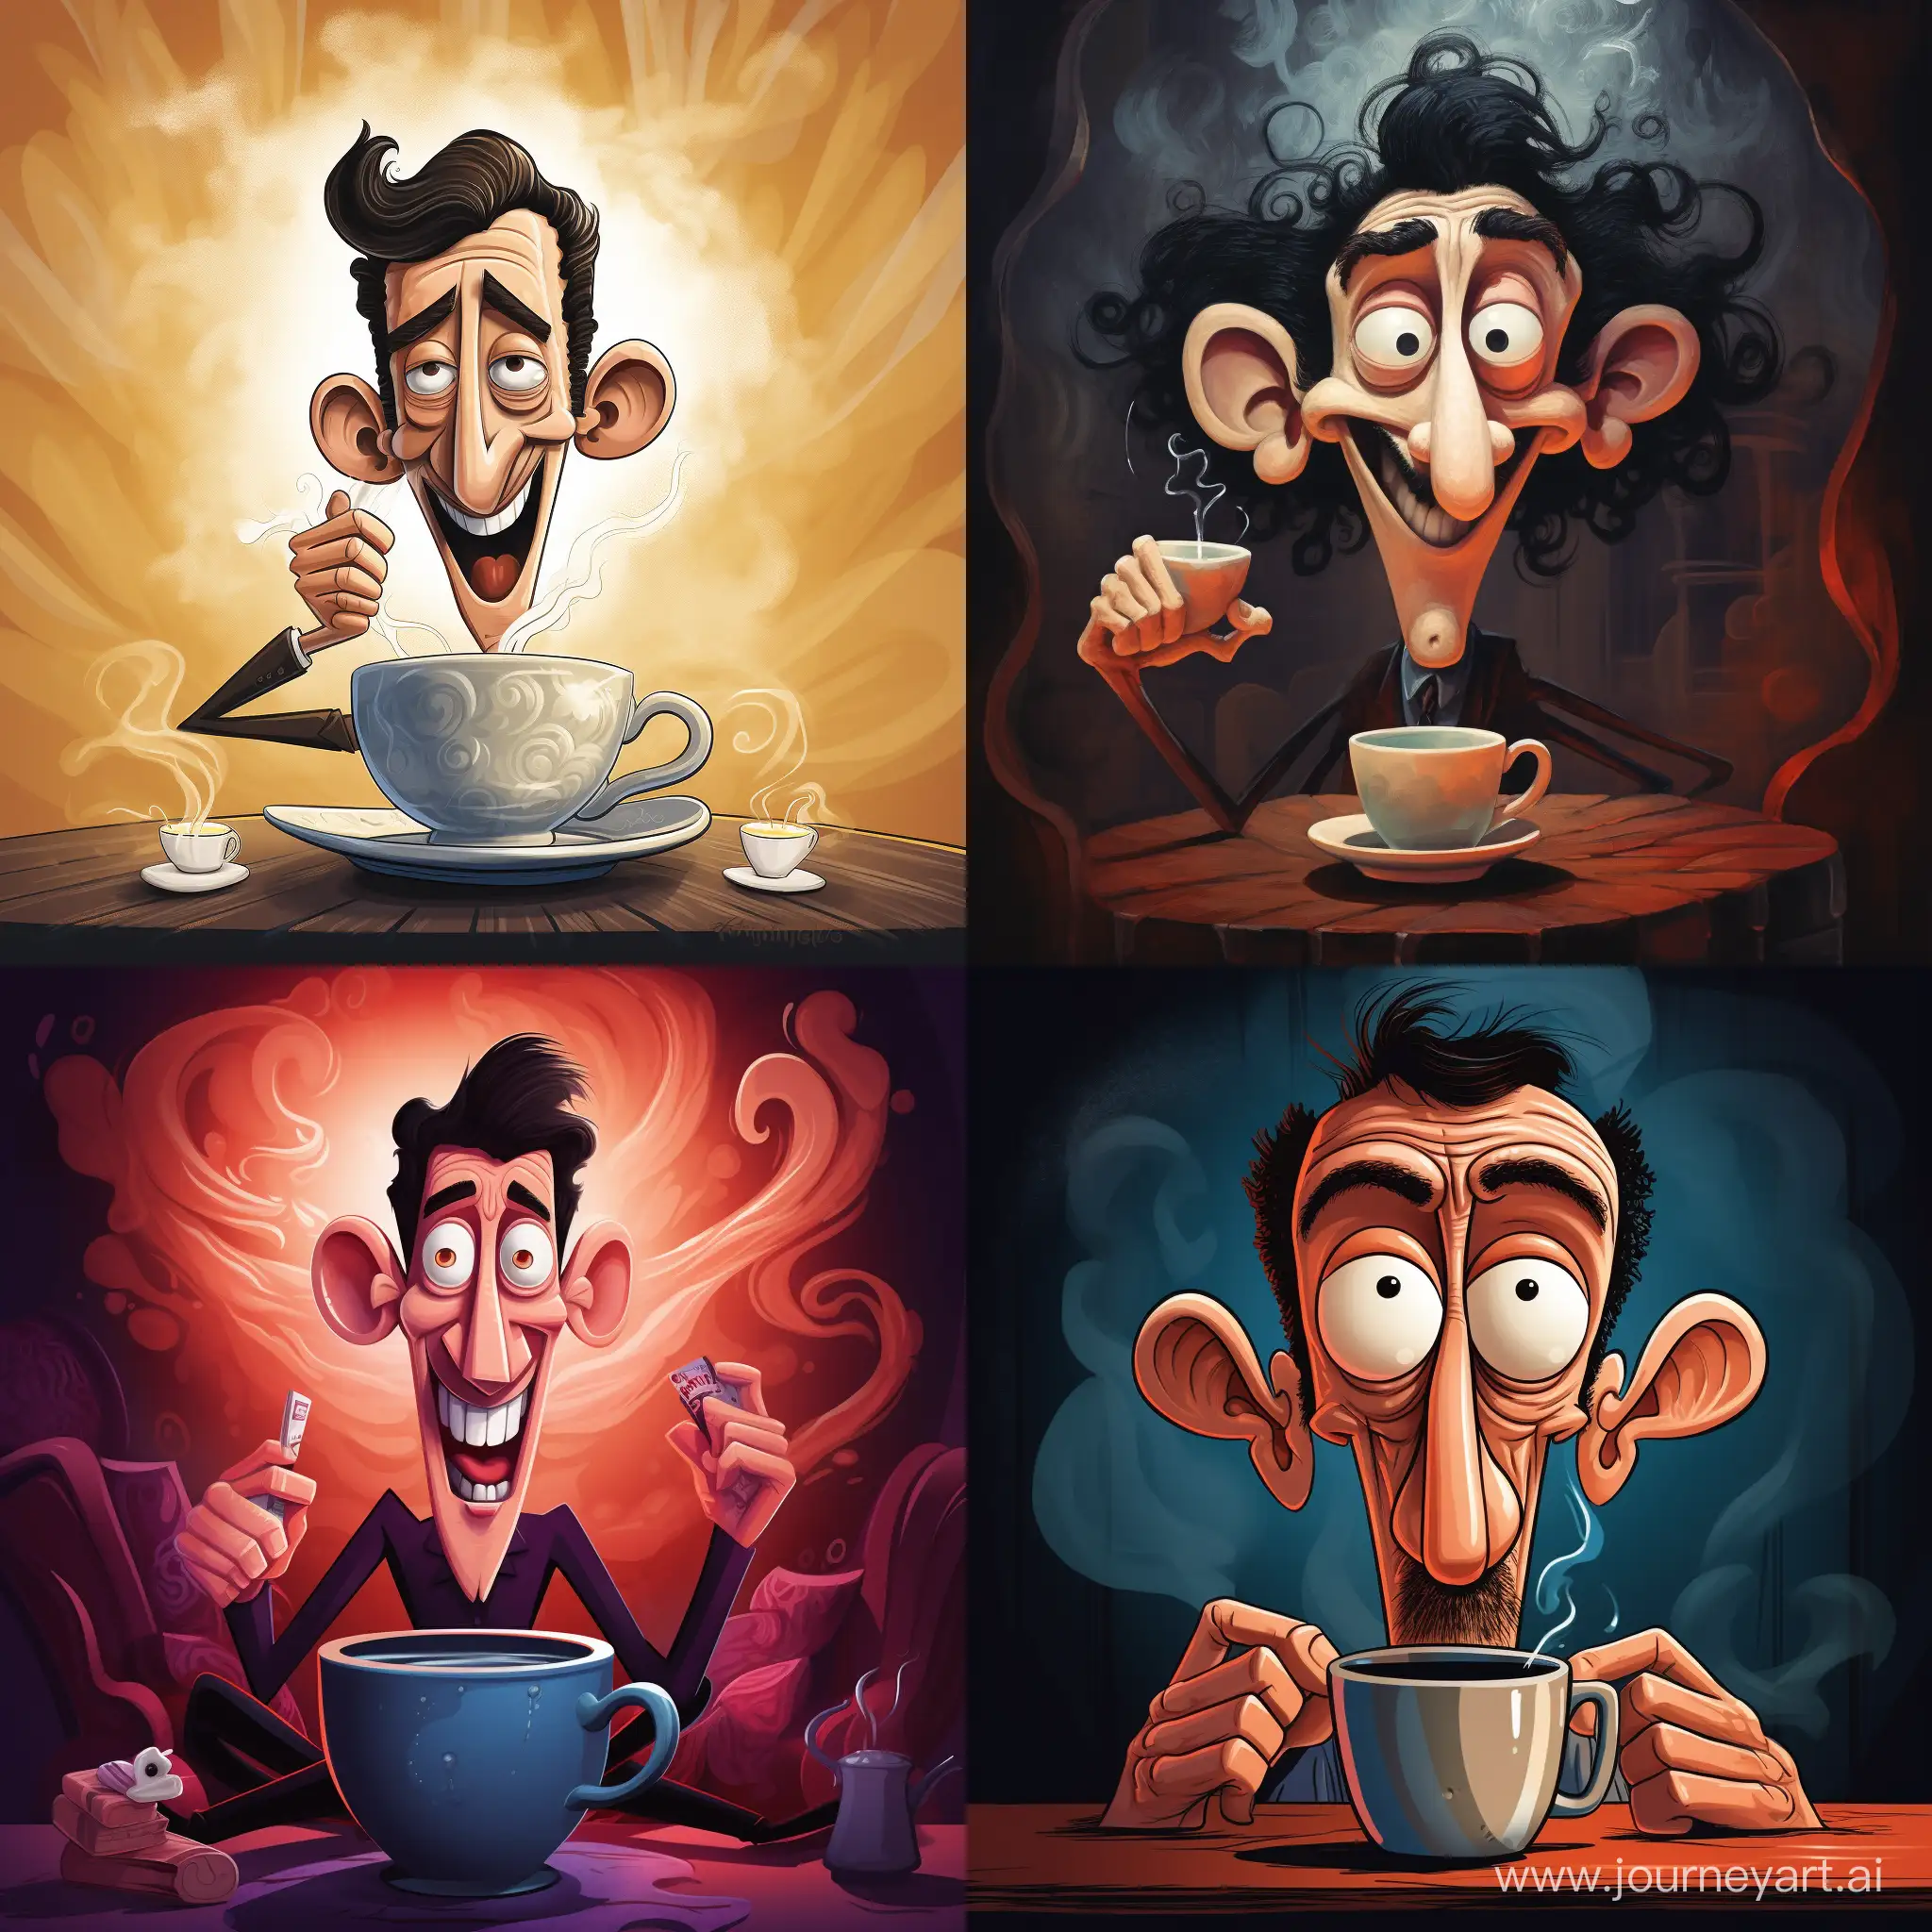 man with a big nose sitting inside a cup of coffe while smoking. exaggerated cartoonish.